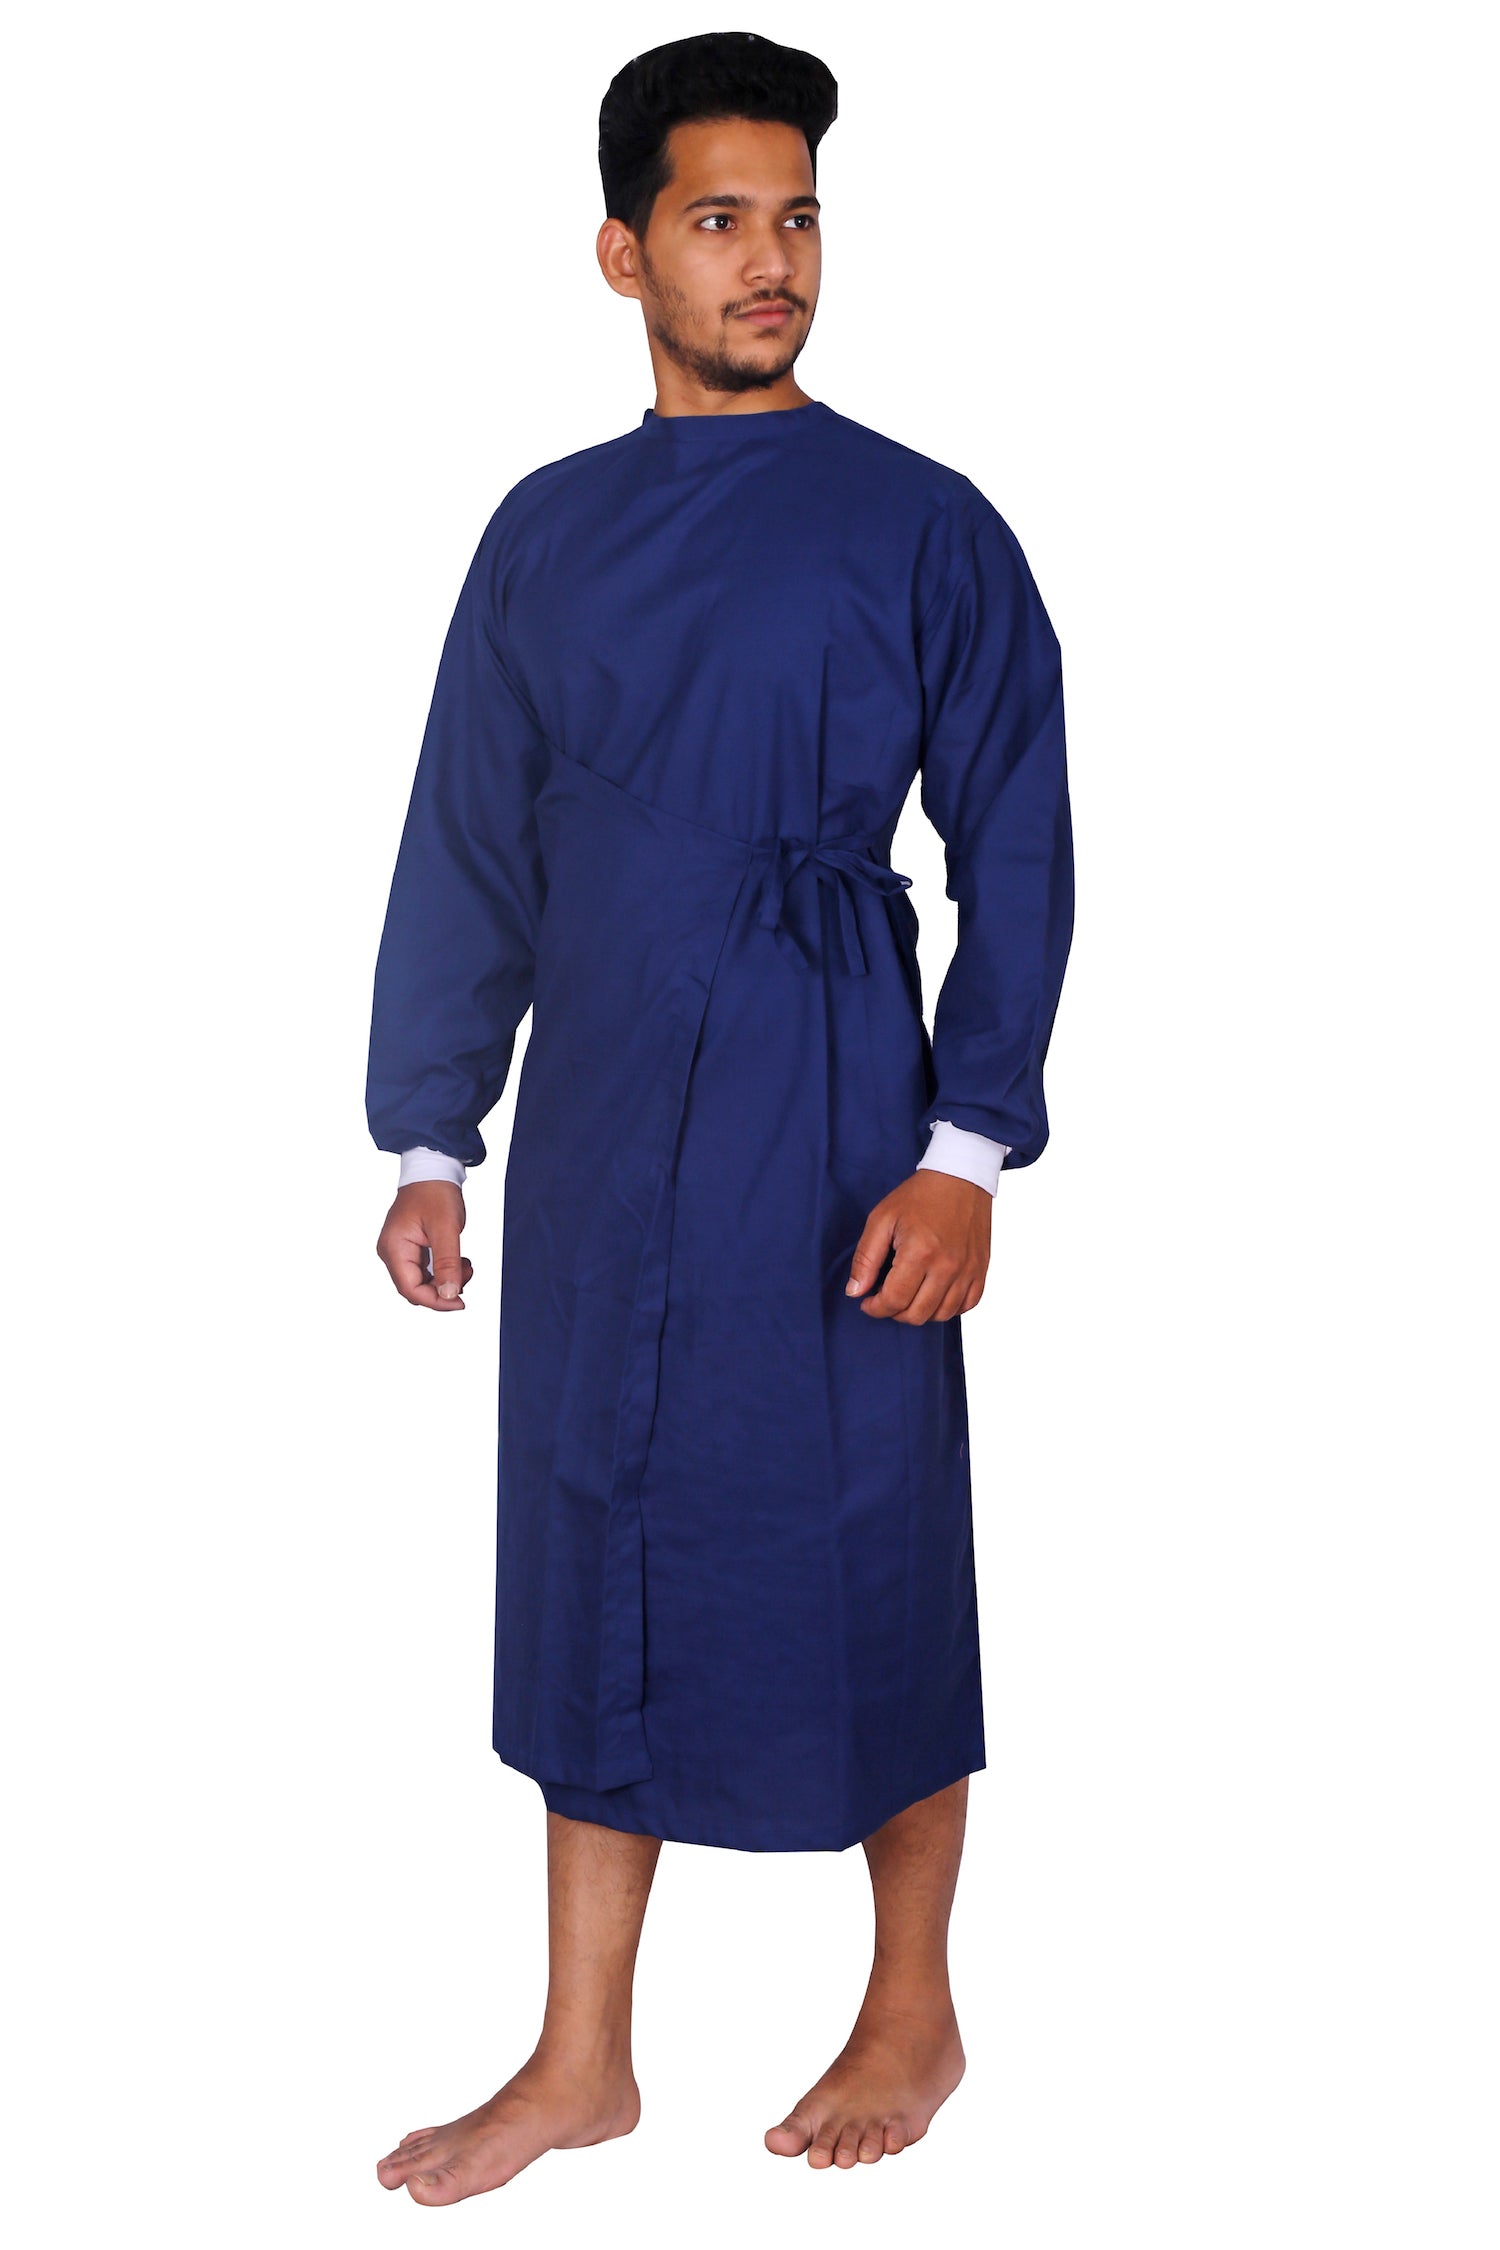 How To Wear a Surgical Gown Correctly?